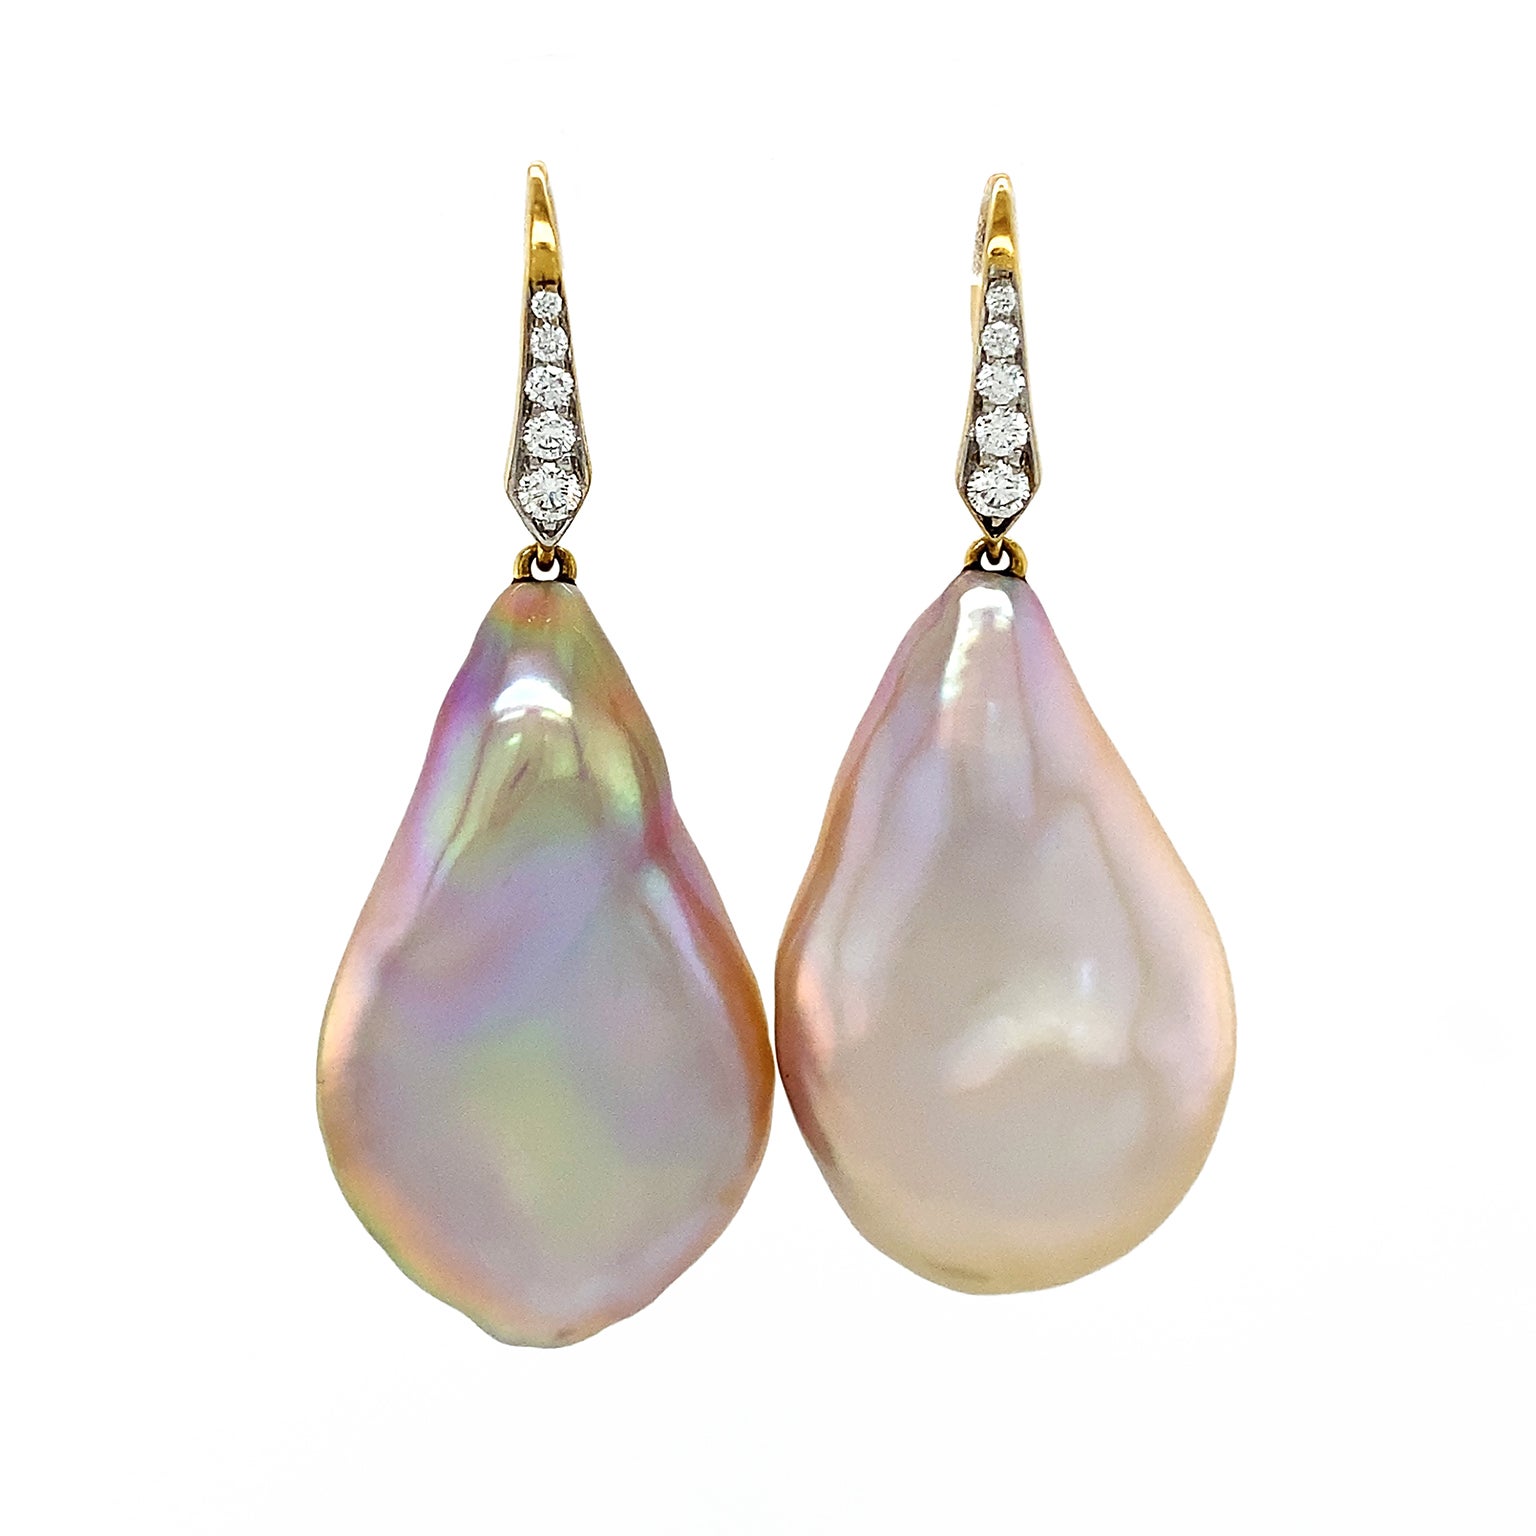 Baroque freshwater pearls are acclaimed in these drop earrings. 18k yellow gold lever backs with pave set brilliant cut diamonds glimmer as they suspend pearls of an irregular teardrop shape. While the bodies have a delicate warm overtone, the light